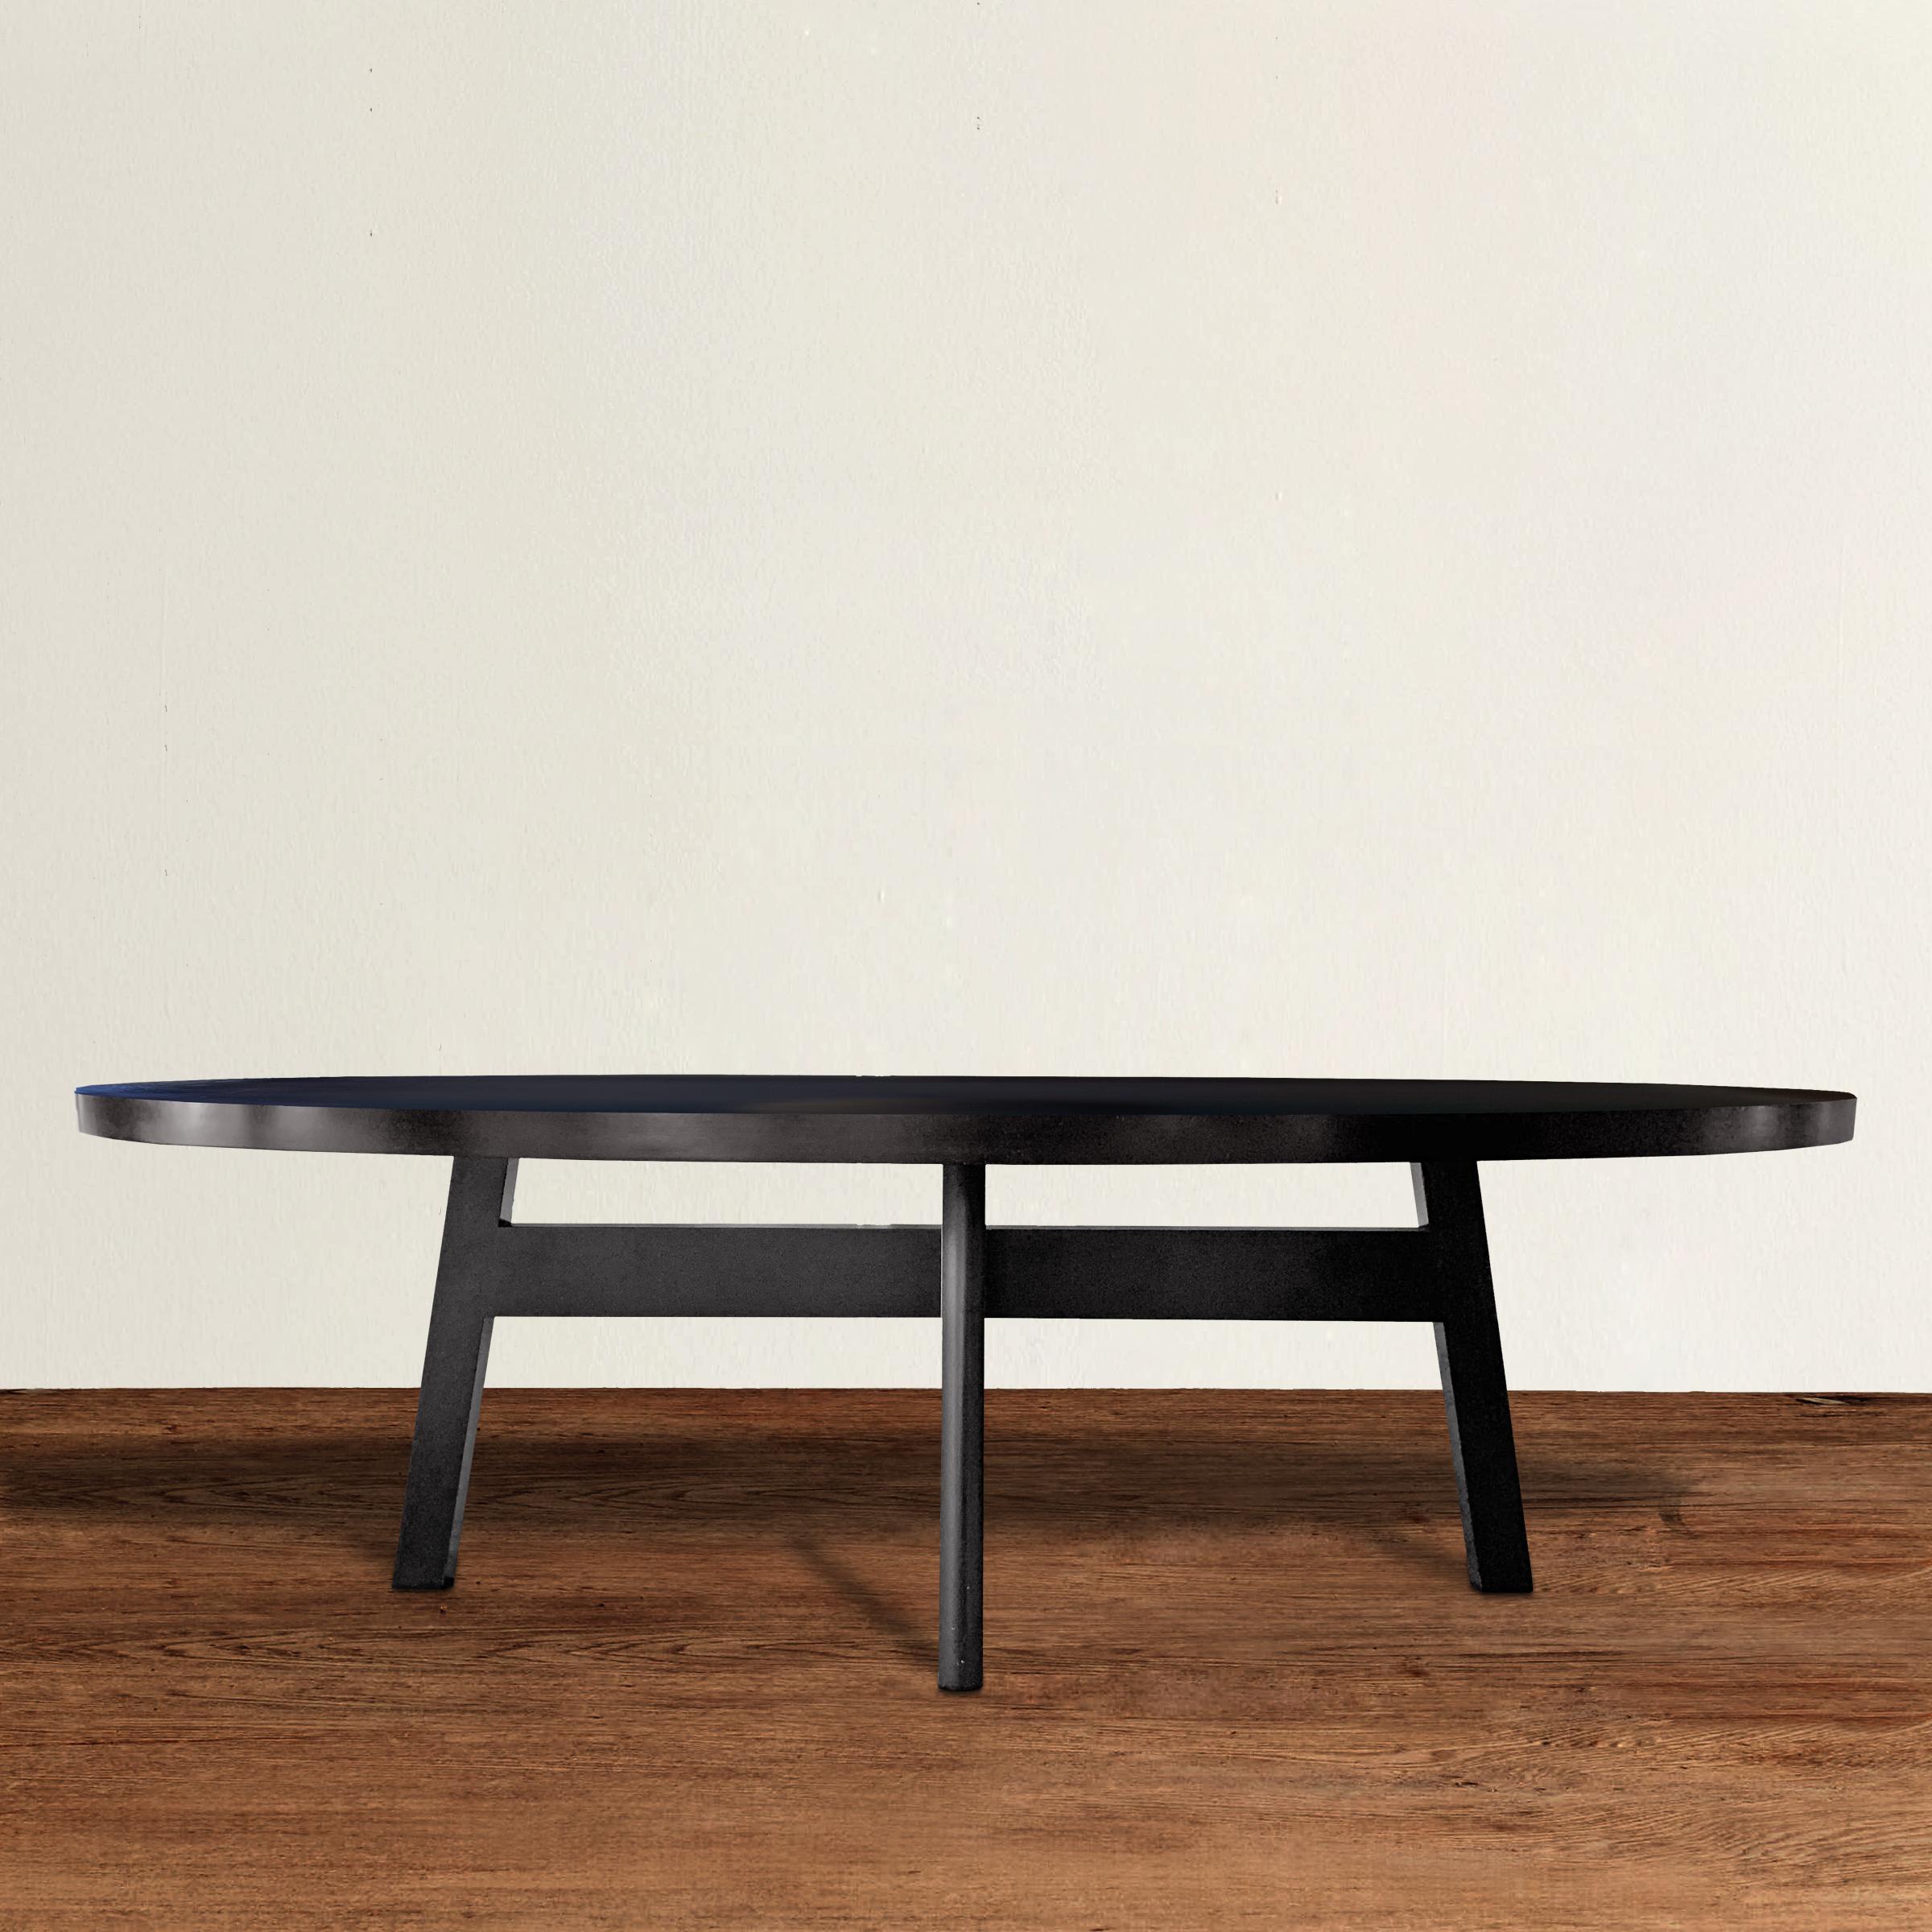 A wonderfully chic Christian Liaigre designed for Holly Hunt custom oak oval dining table with a simple cross-stretcher base with four legs, and a dark ebony stained finish. This table has a classical form that honors the past with strong lines that